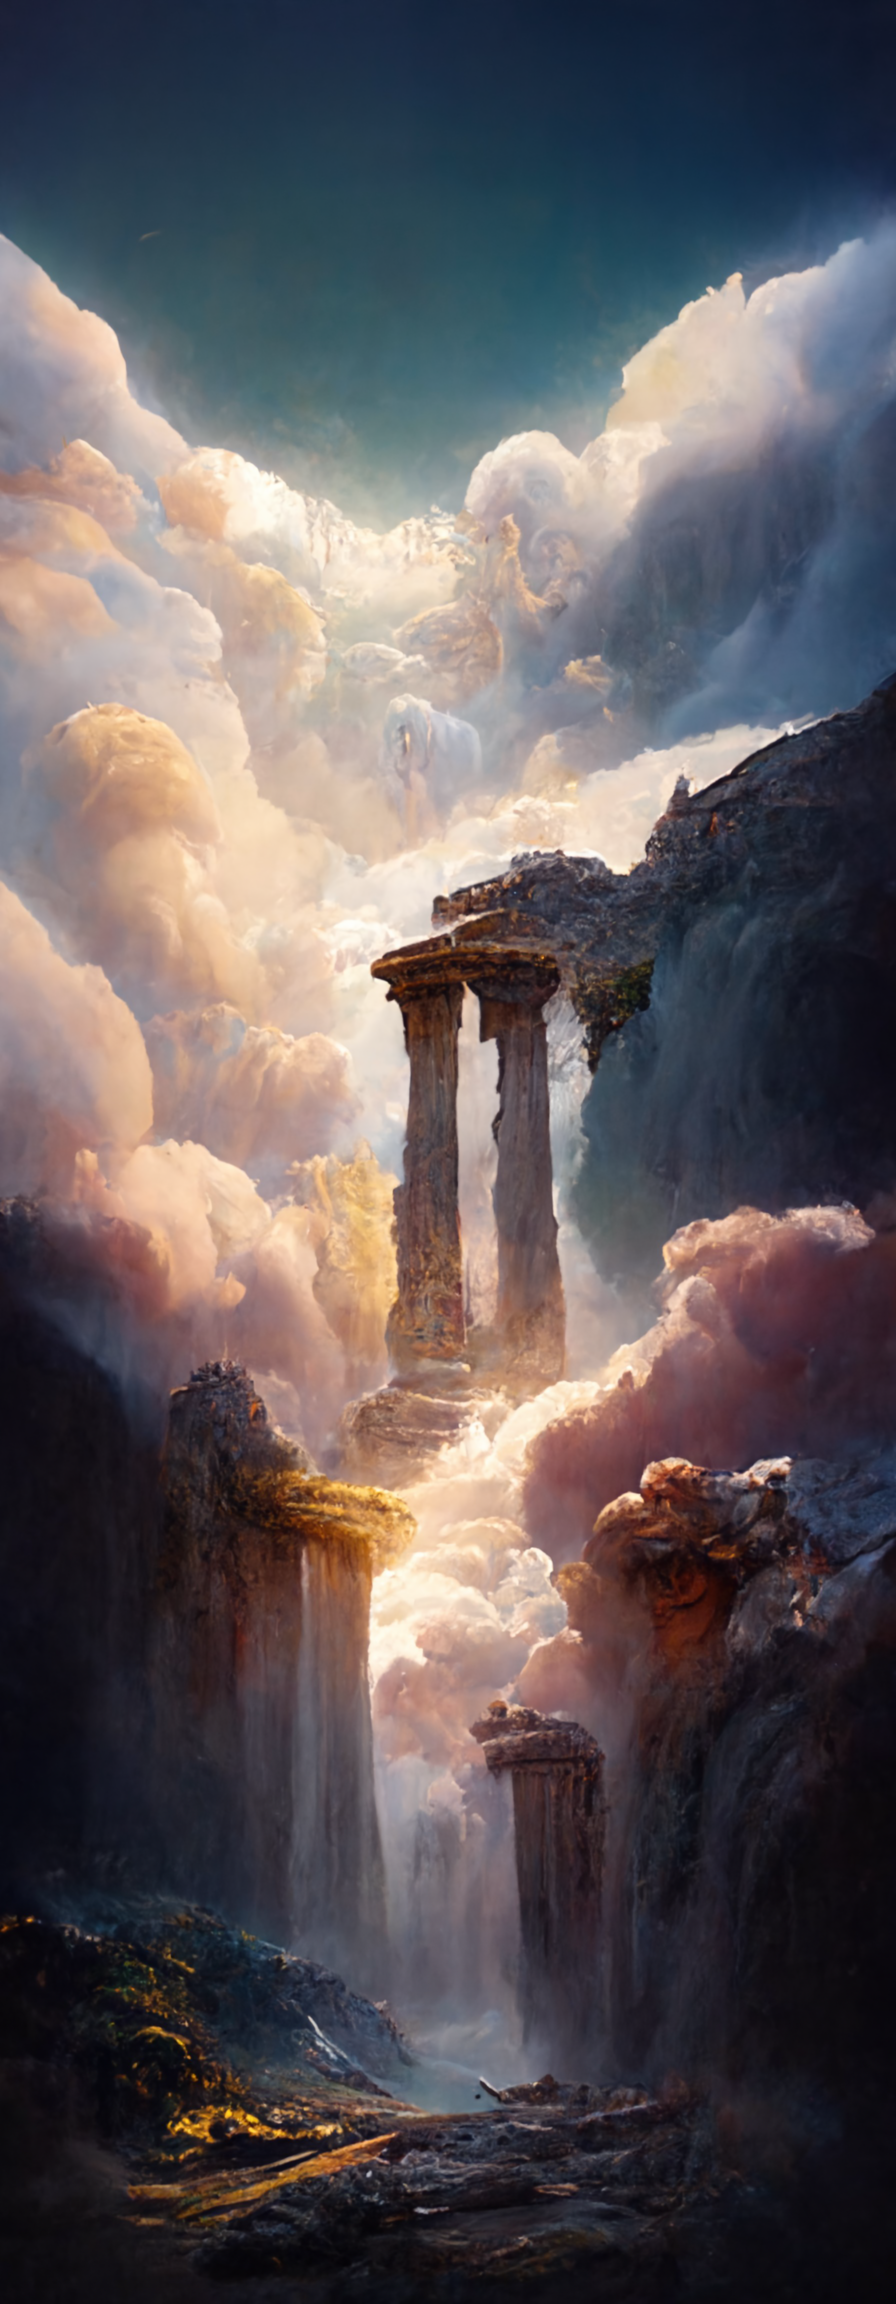 Zyvo_Mount_Olympus_clouds_by_Kentaro_Miura_marble_columns_vivid_a0206e70-0adc-4b33-ab5a-112f9de40463.png